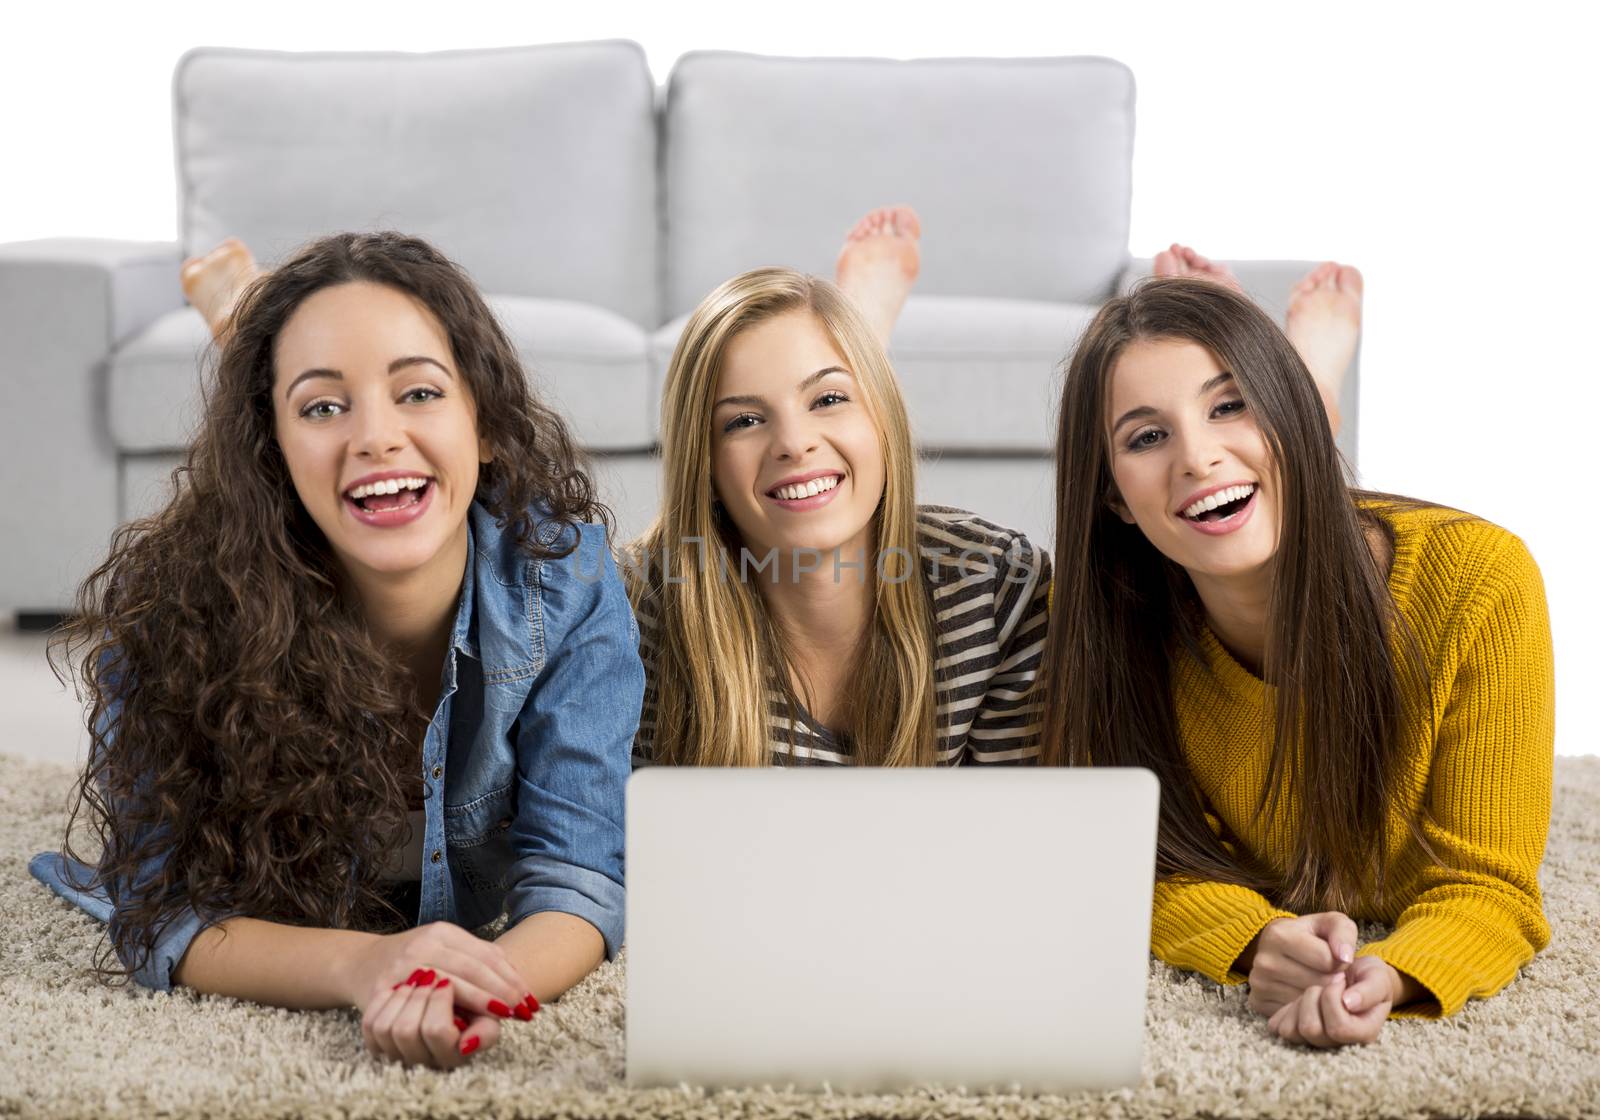 Happy teen girls studying at home with a laptop